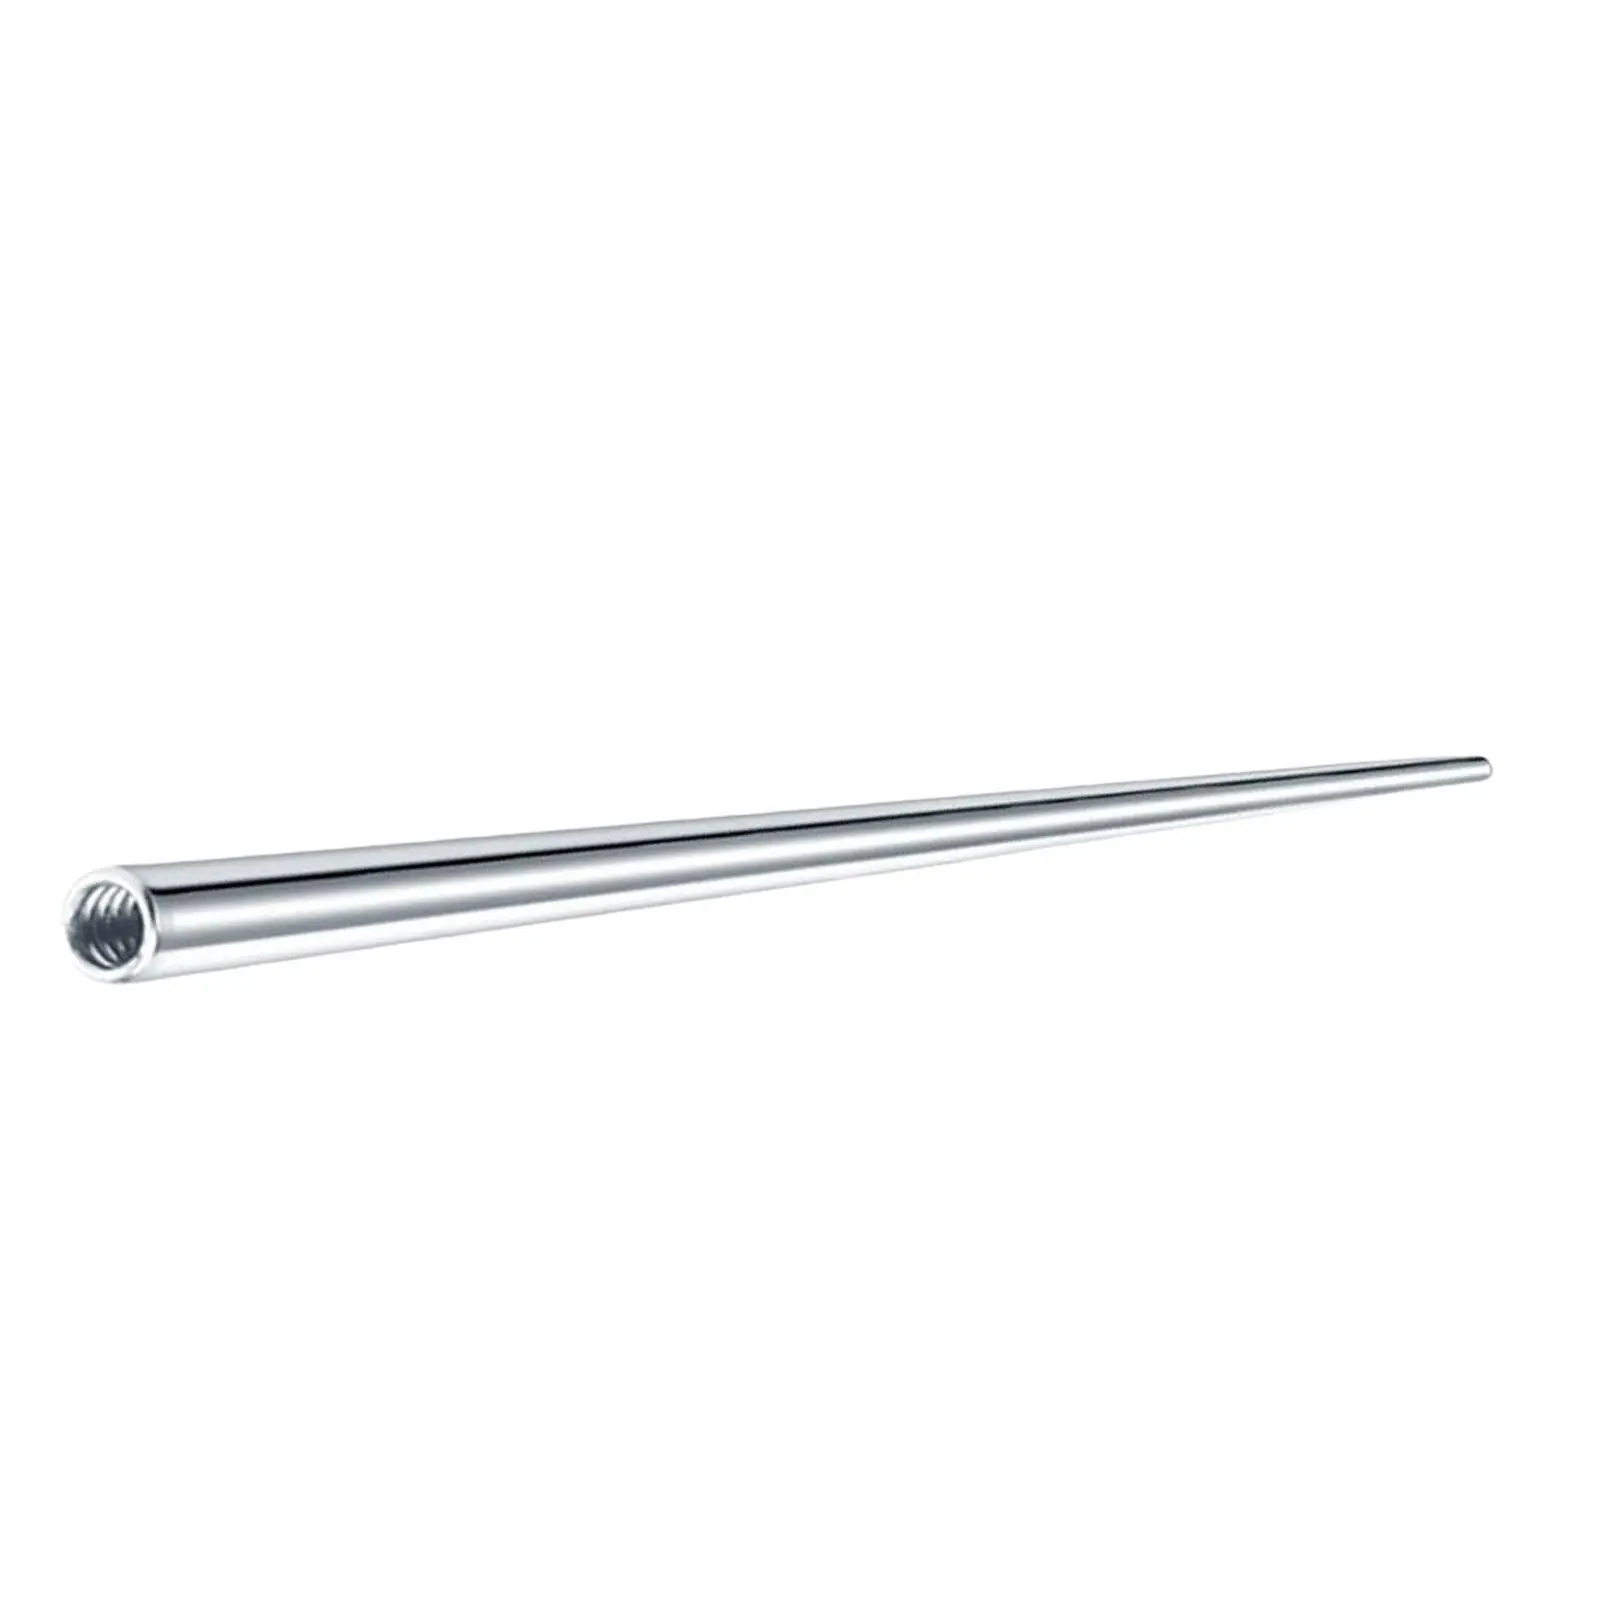 Threaded Taper for Threaded Jewelry Piercing Tool Stainless Steel for Ears